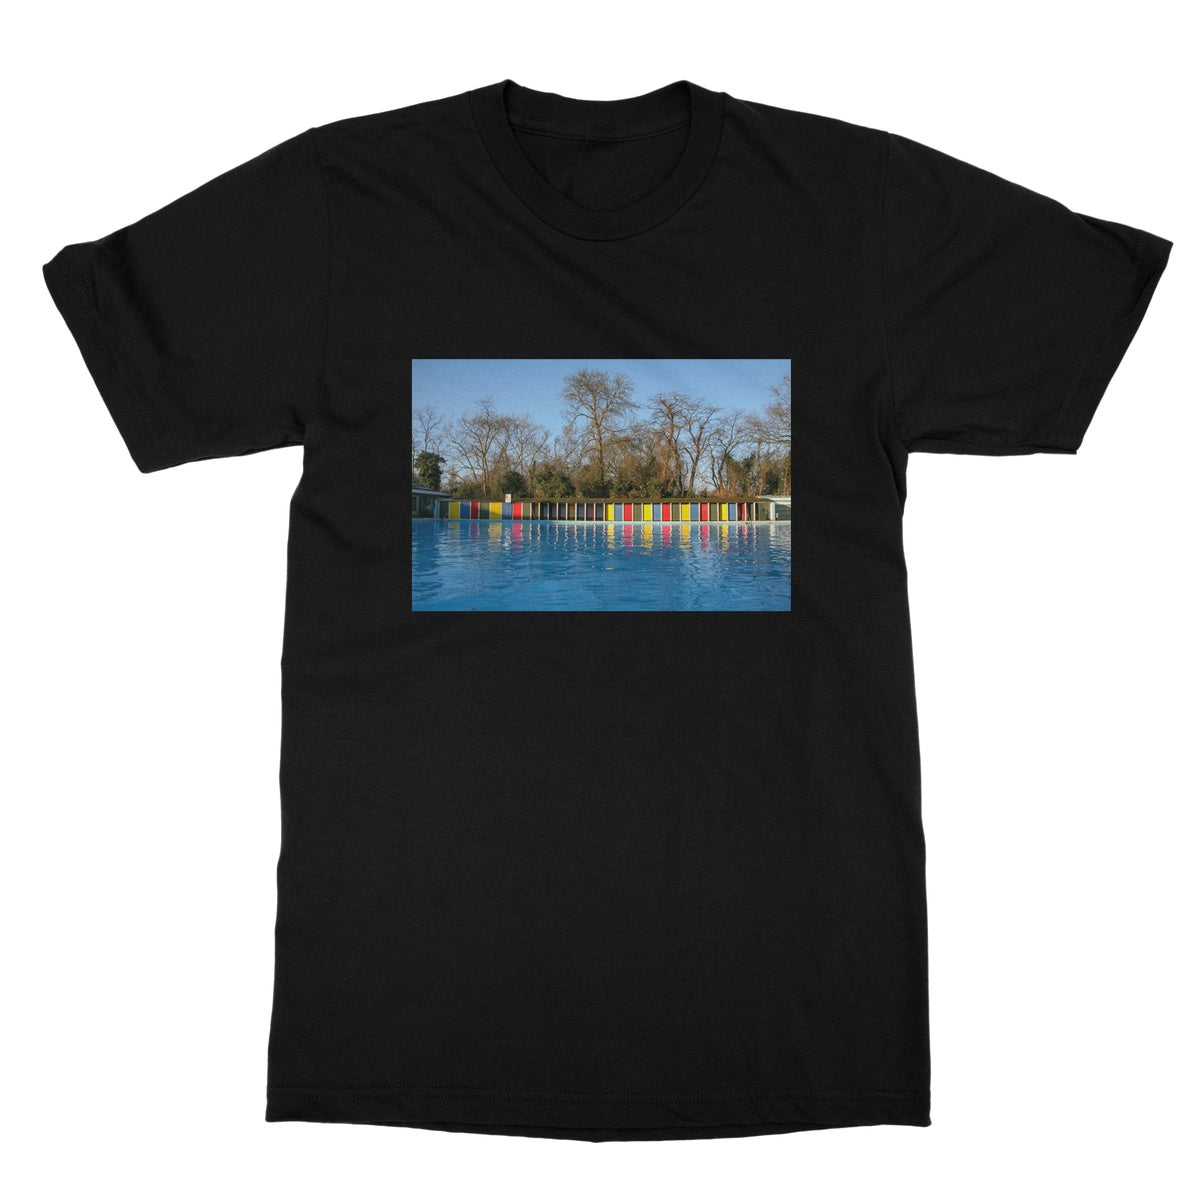 TOOTING BEC LIDO WITH TREES Softstyle T-Shirt - Amy Adams Photography